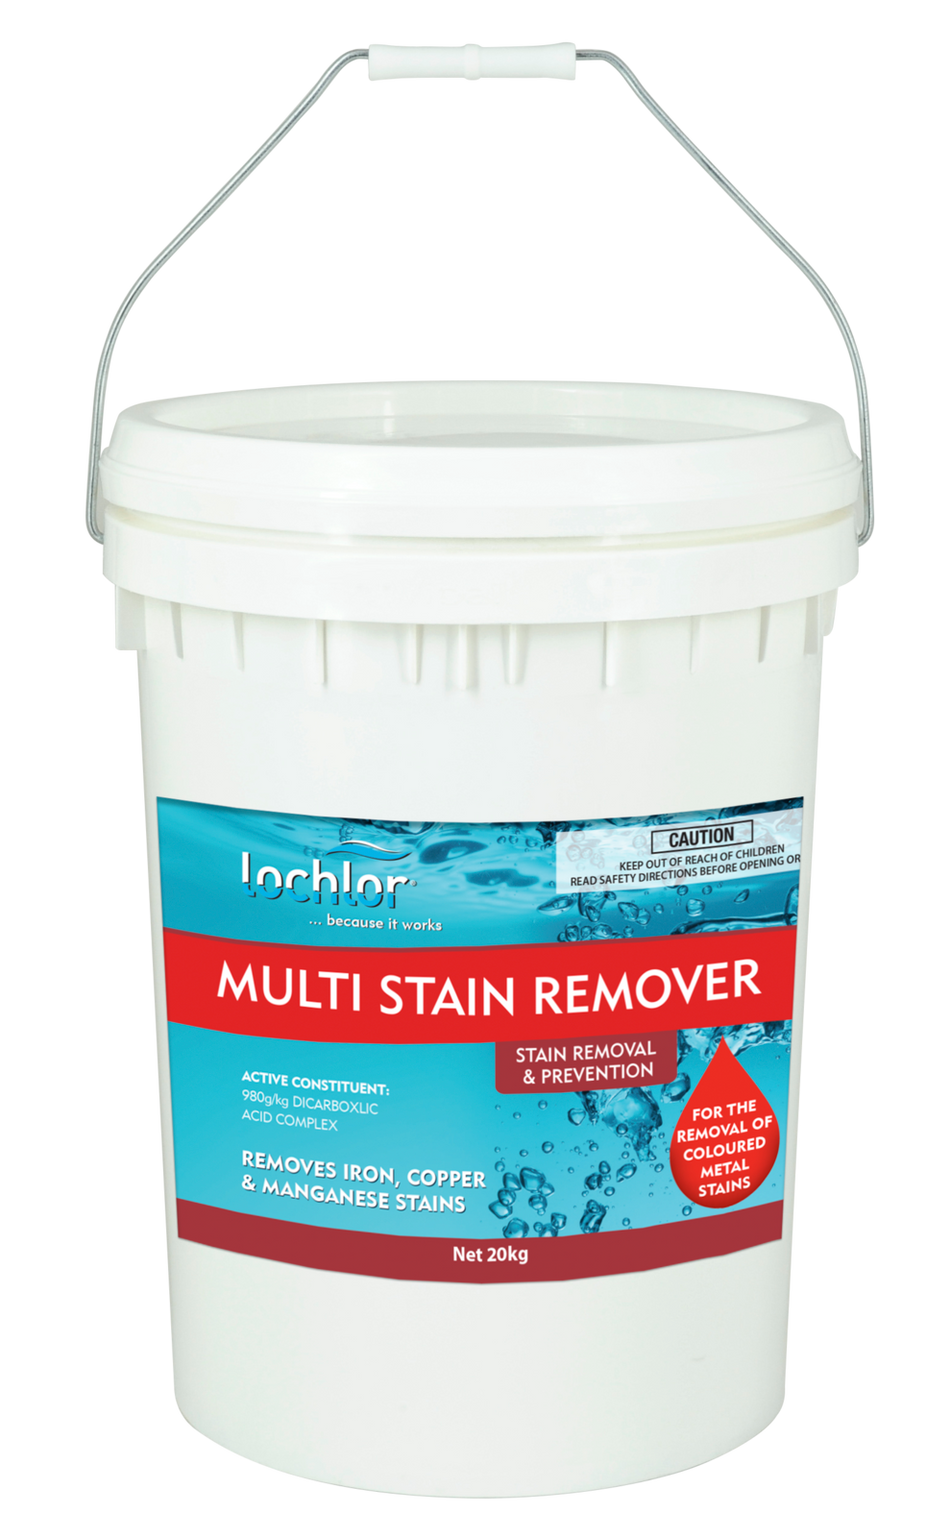 Lo-Chlor - 20kg Multi Stain Remover